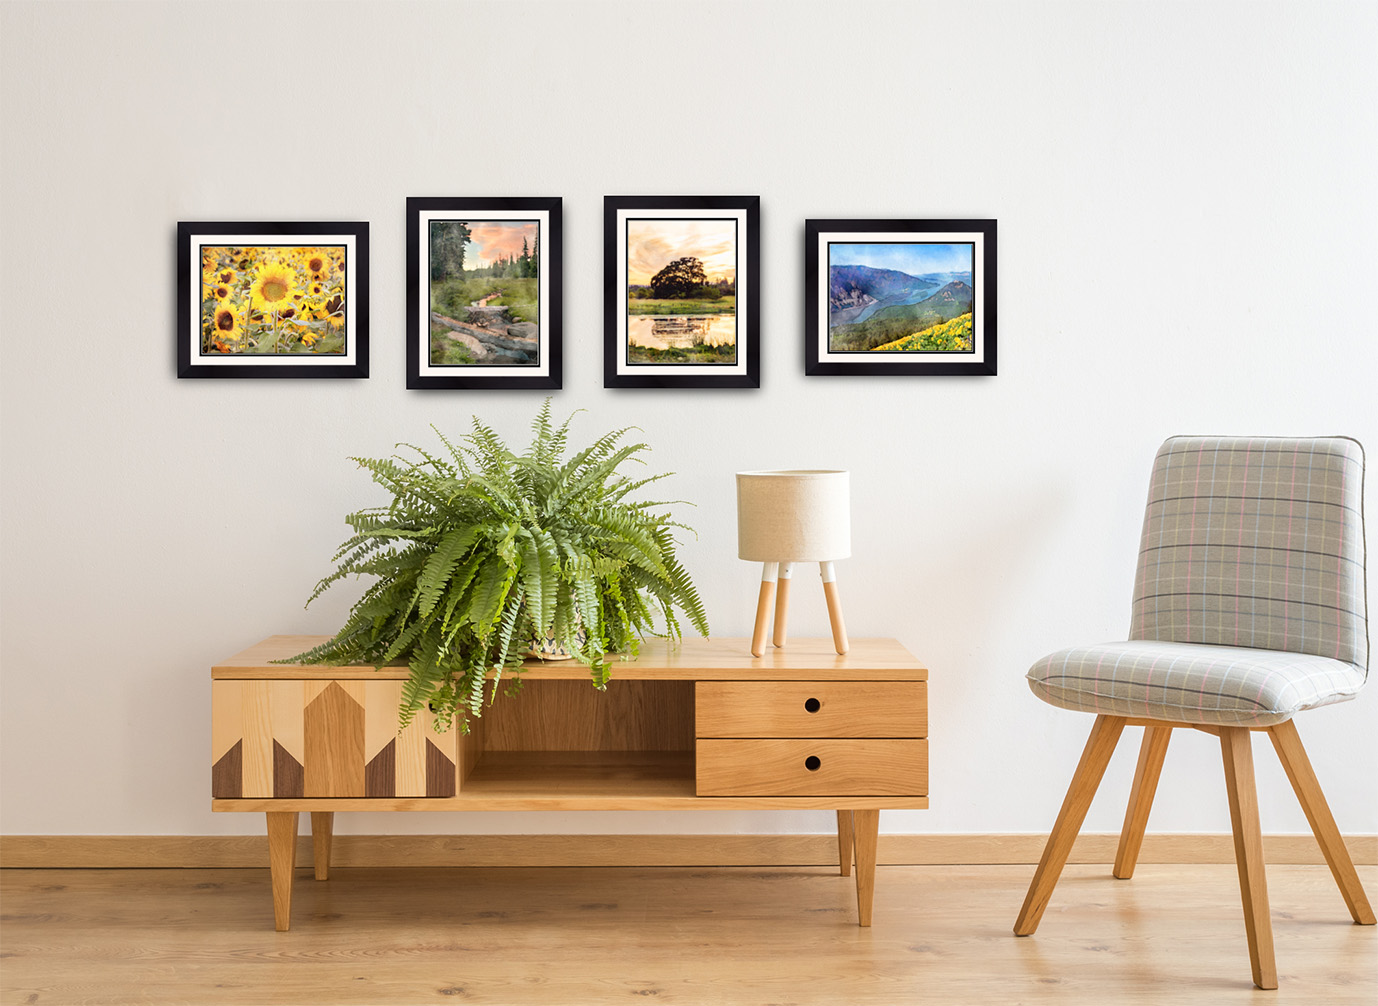 Kindness Roots "Art of Gratitude" Prints of a sunflower and river view are framed and displayed over a desk. 